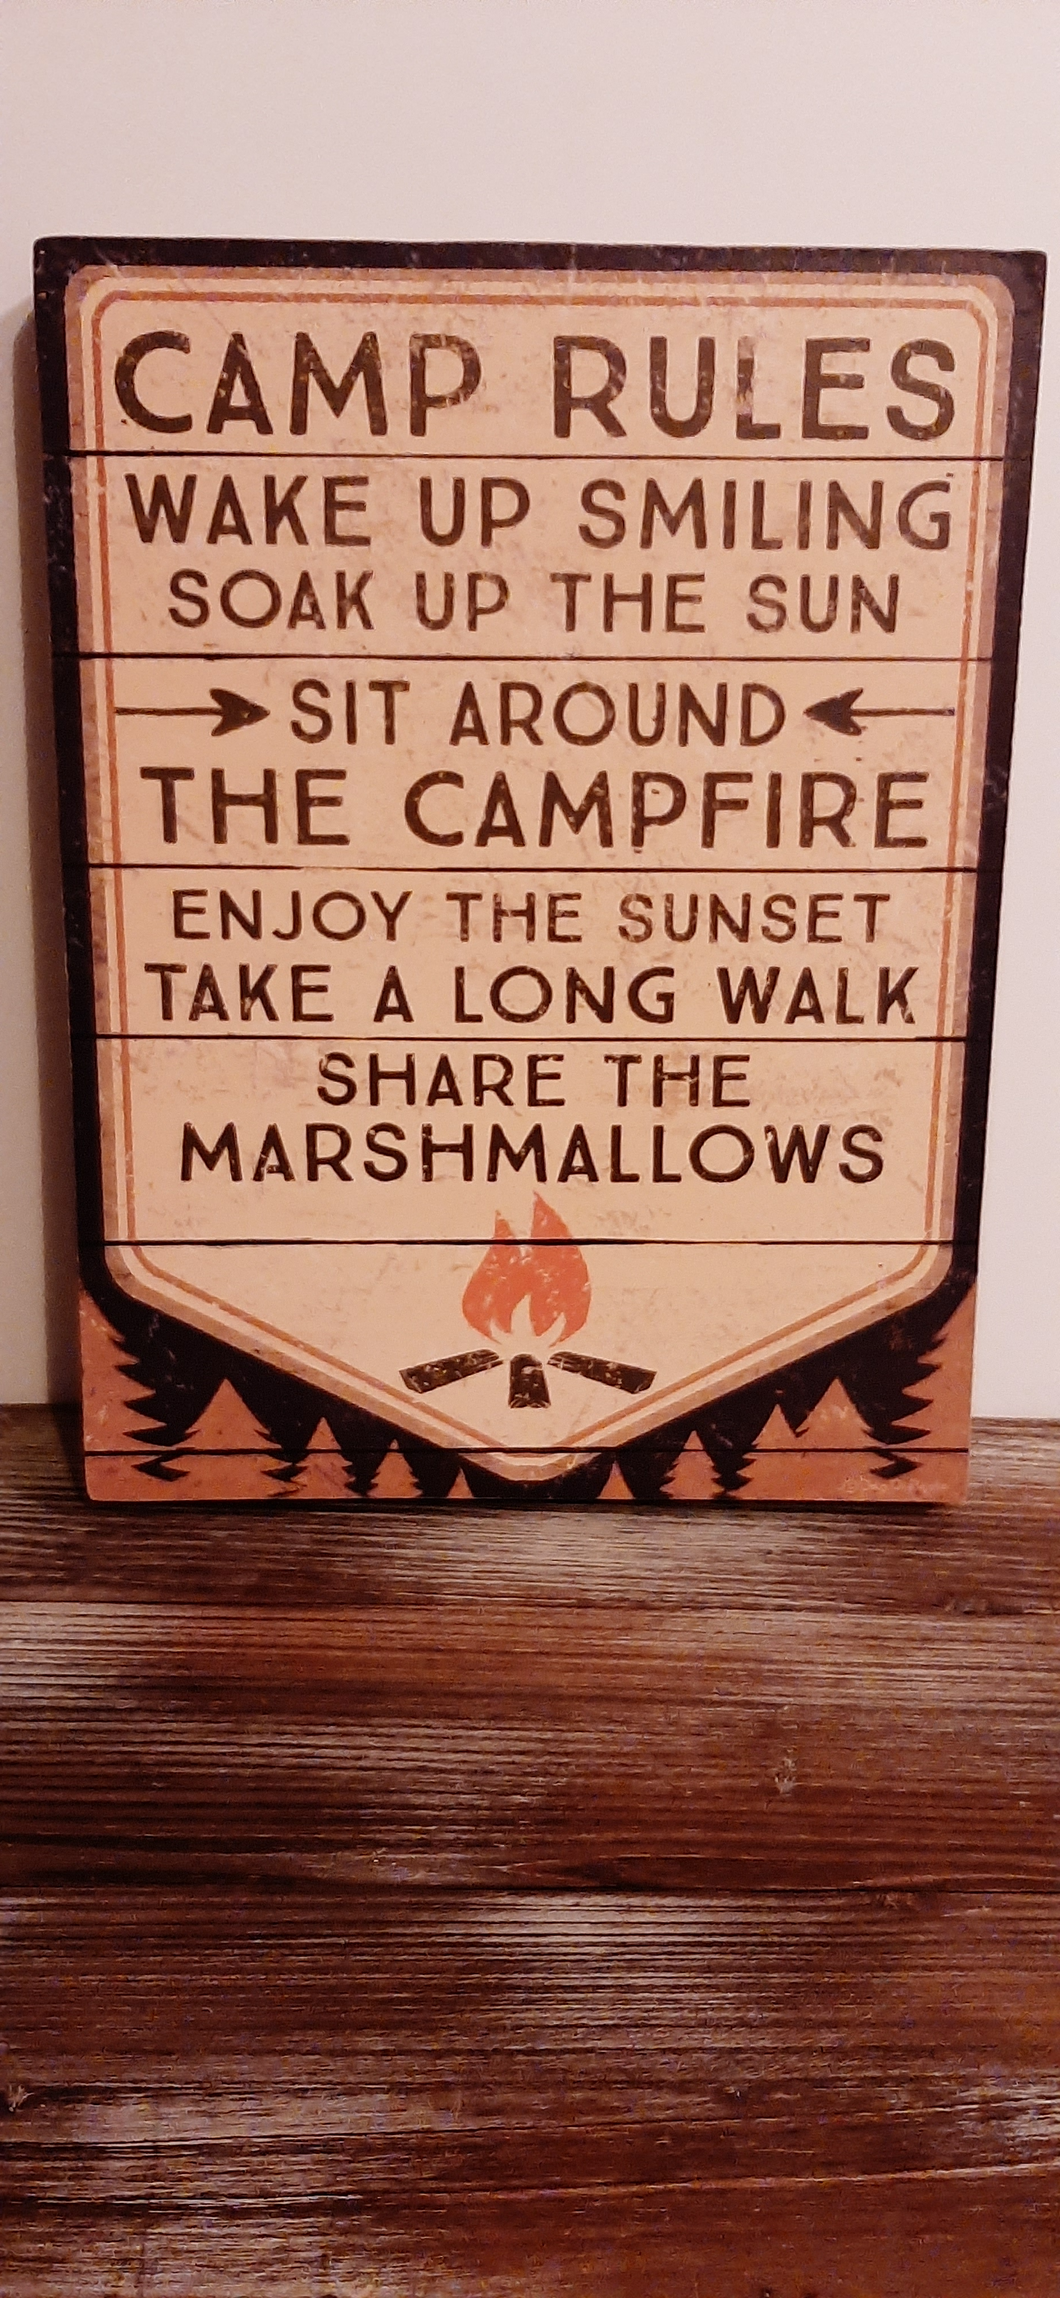 Camp rules sign